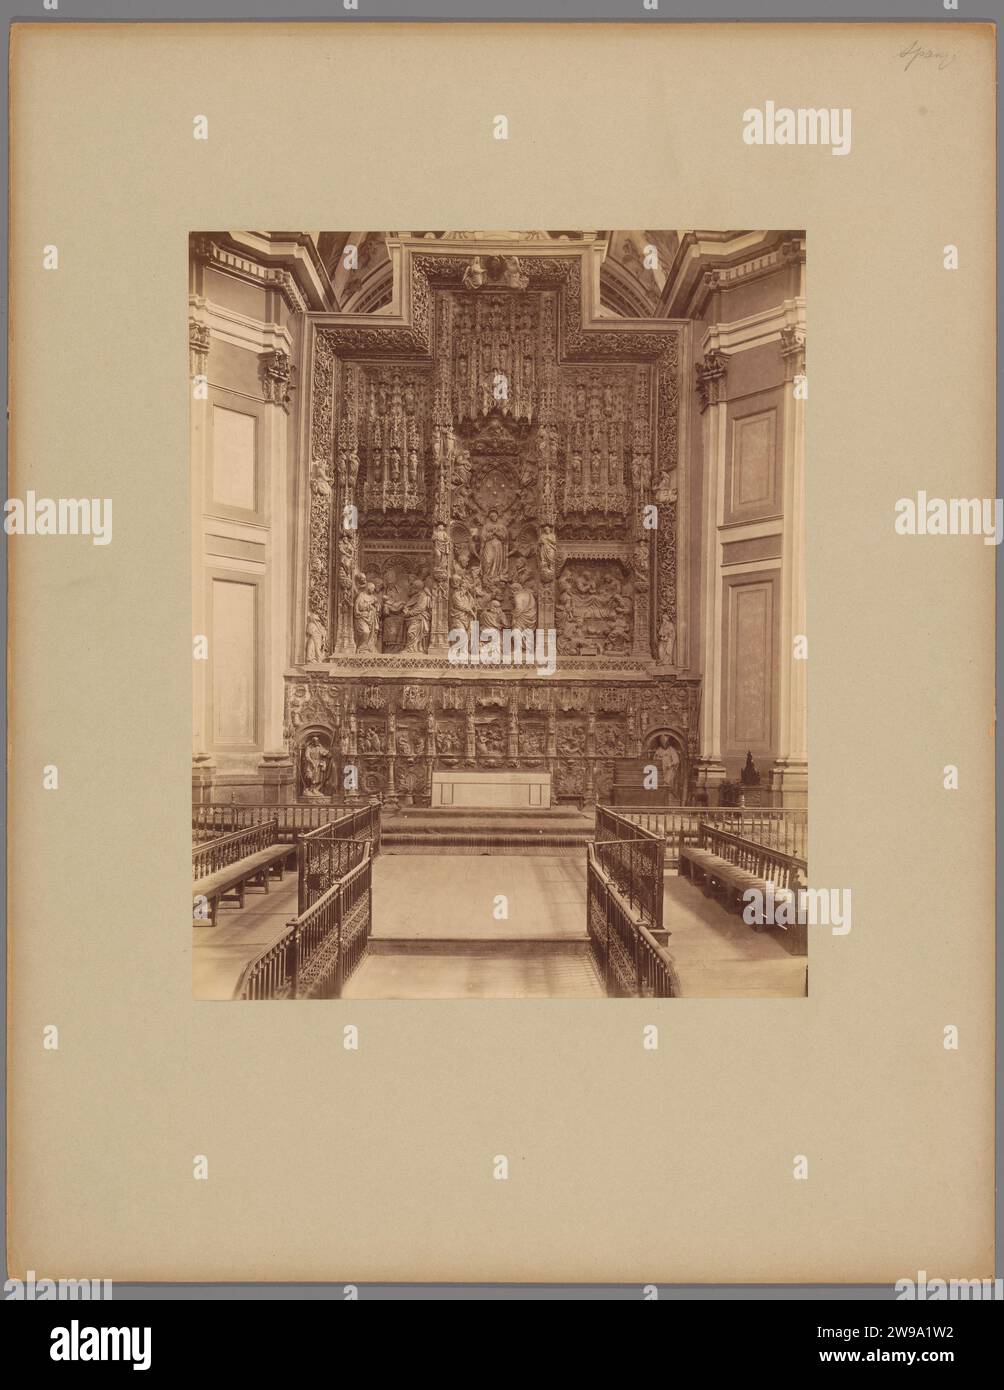 Retable in a church (presumably) in Spain, c. 1875 - c. 1900 photograph  Spain cardboard. photographic support albumen print altar with dossel (dorsal), 'reredos', altar-screen, retable. interior of church. sculpture (+ relief  sculpture) Spain Stock Photo